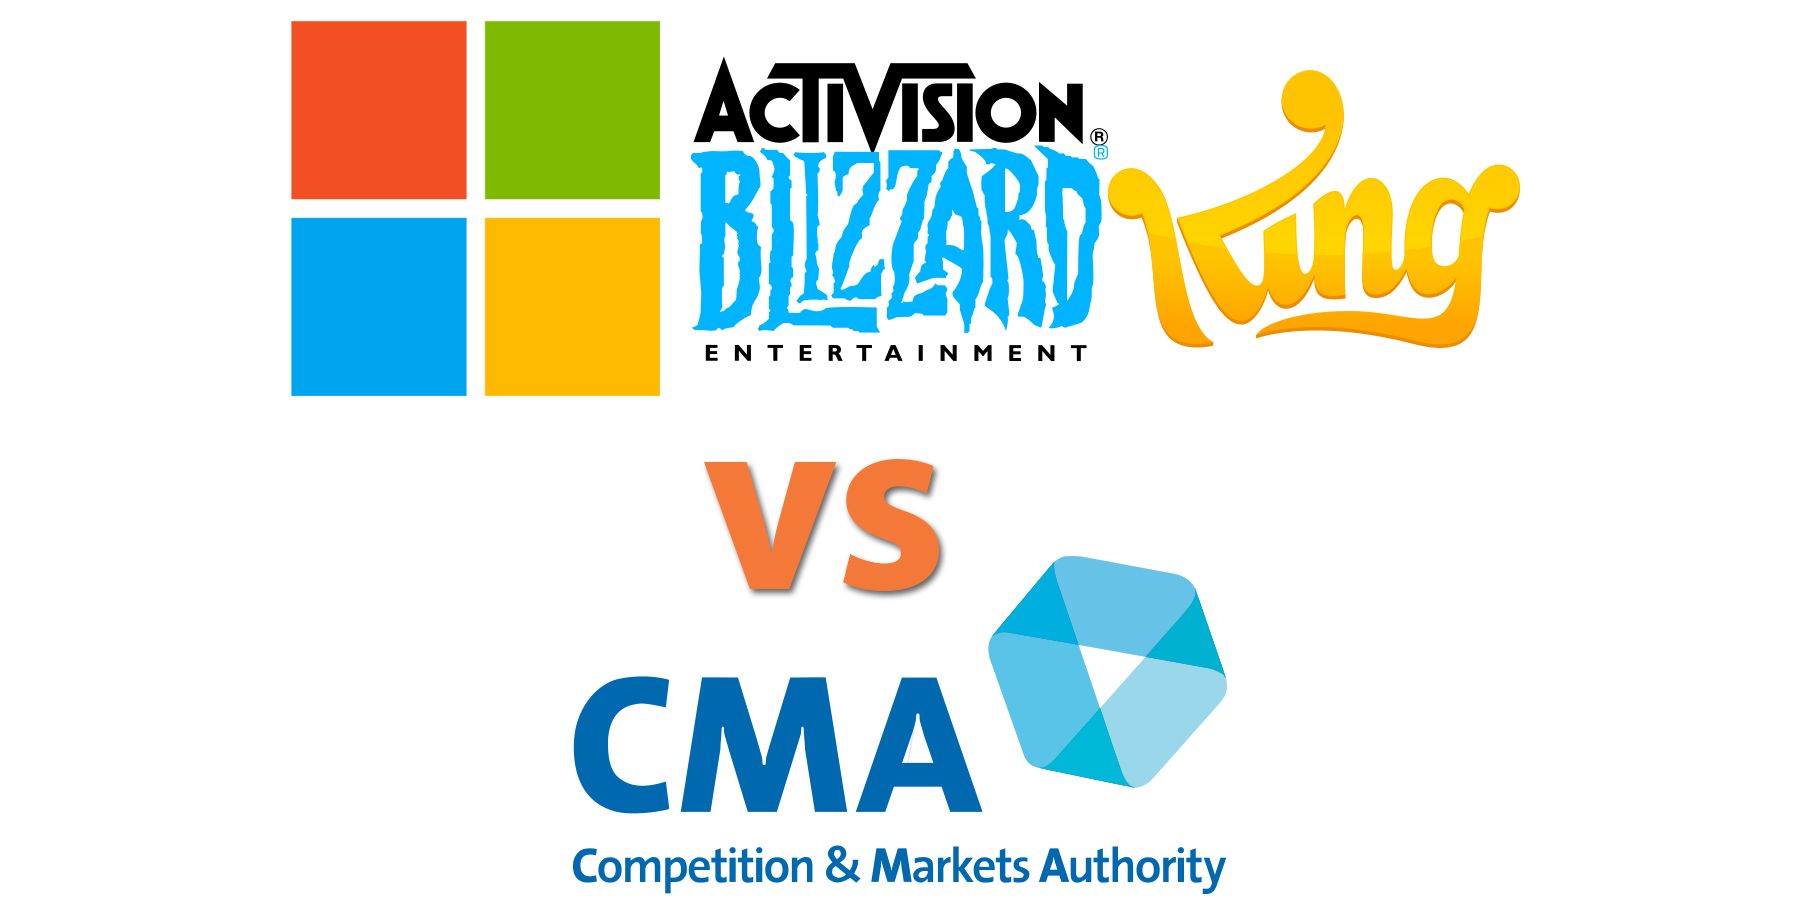 Microsoft Activision Blizzard King vs Competition and Markets Authority CMA logos